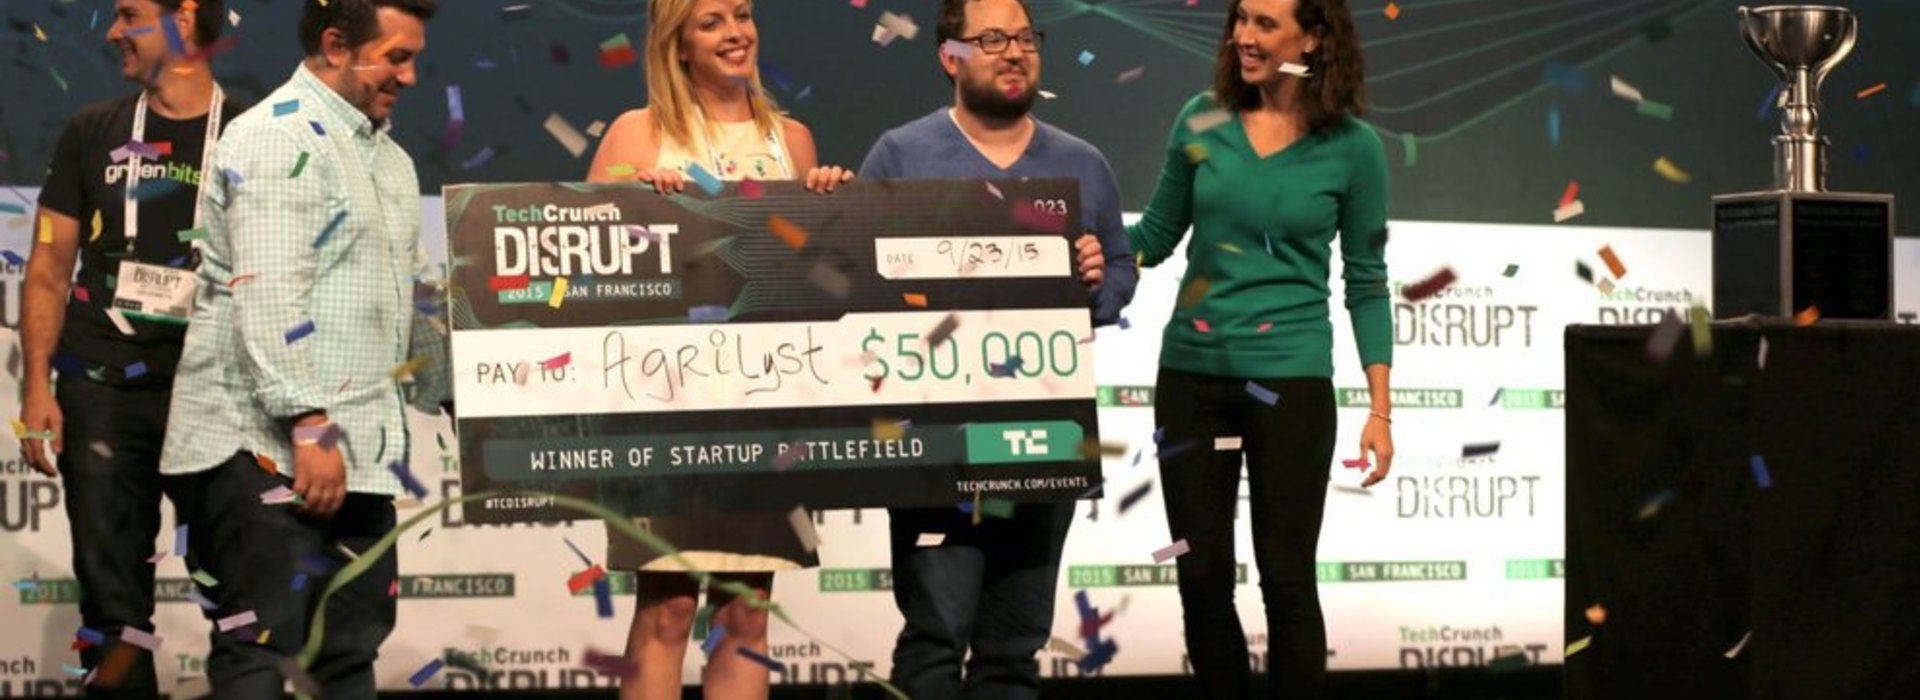 Ag-tech Startup Agrilyst (USA) wint Techcrunch Disrupt SF 2015